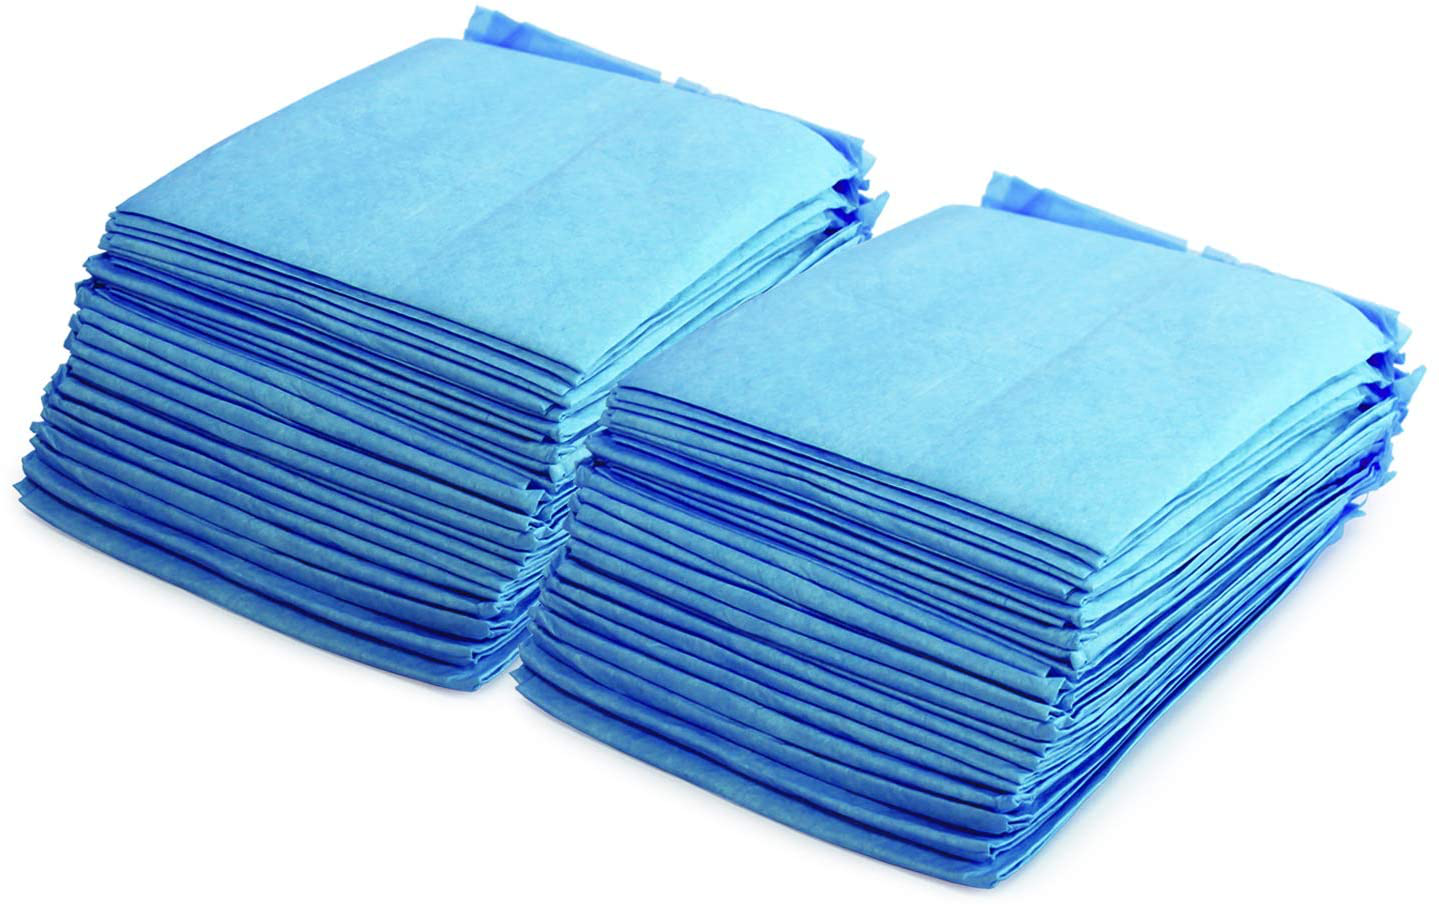 Disposable Bed Pads 22x23 (100 Pcs) Incontinence Adult Underpads  Waterproof, Changing Pee Pads for Baby and Puppy,Absorbent Nursing Chucks  for Women